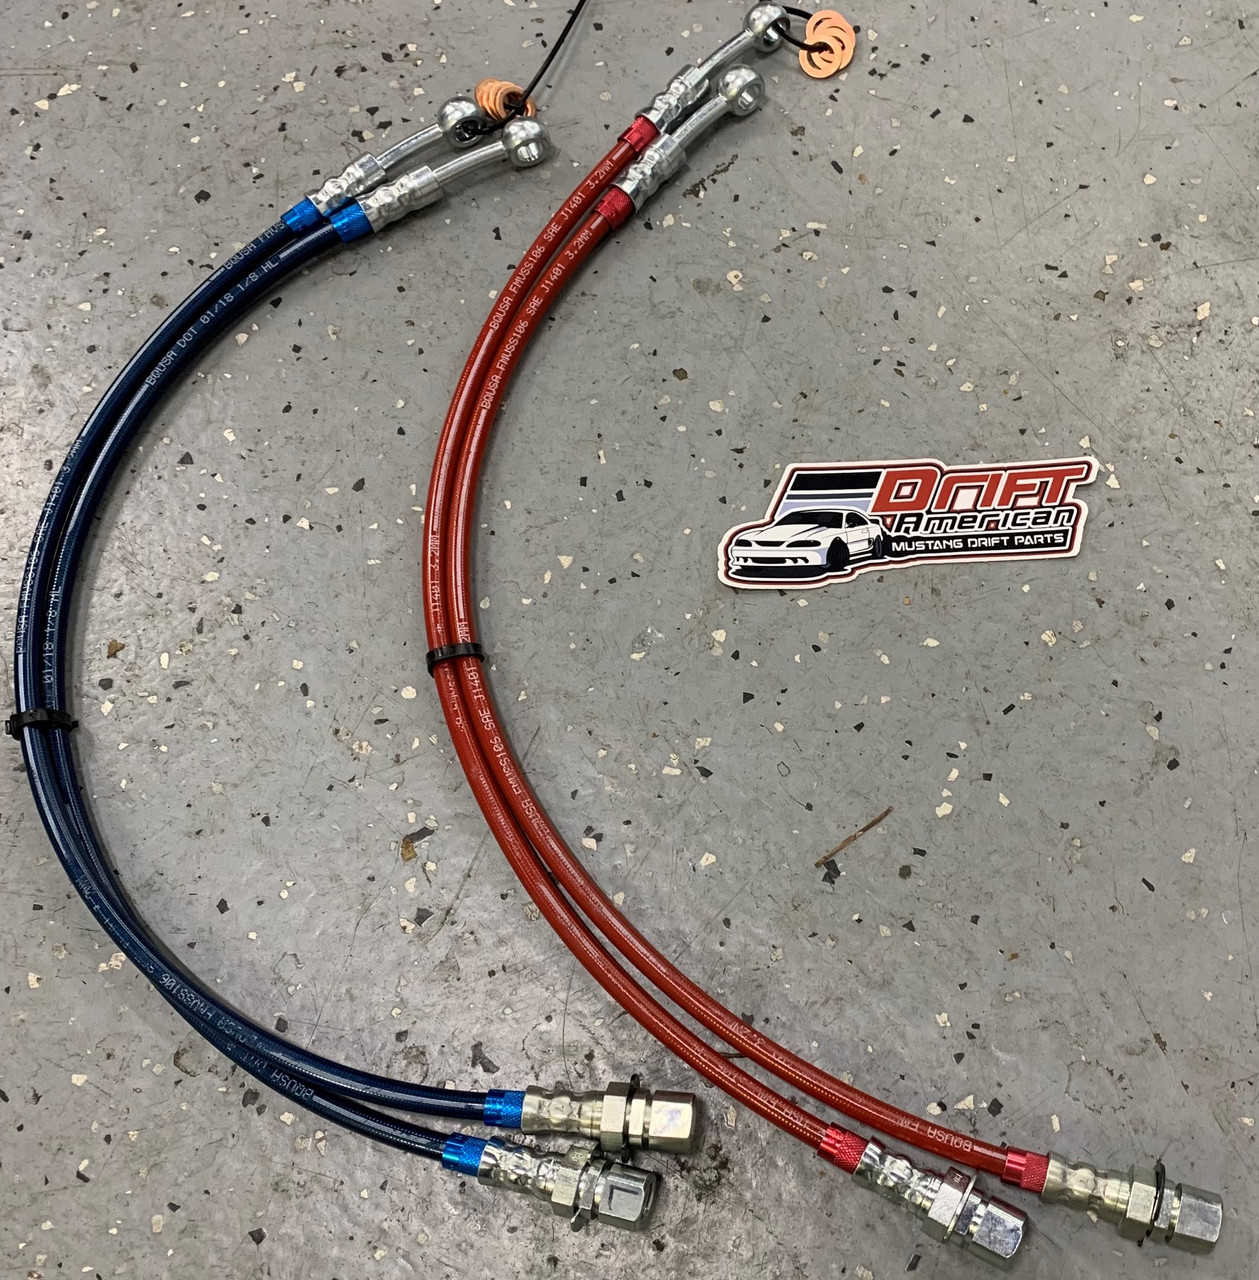 Drift American Extended Length Steel Braided Brake Lines for Ford Mustang shown in blue and red.